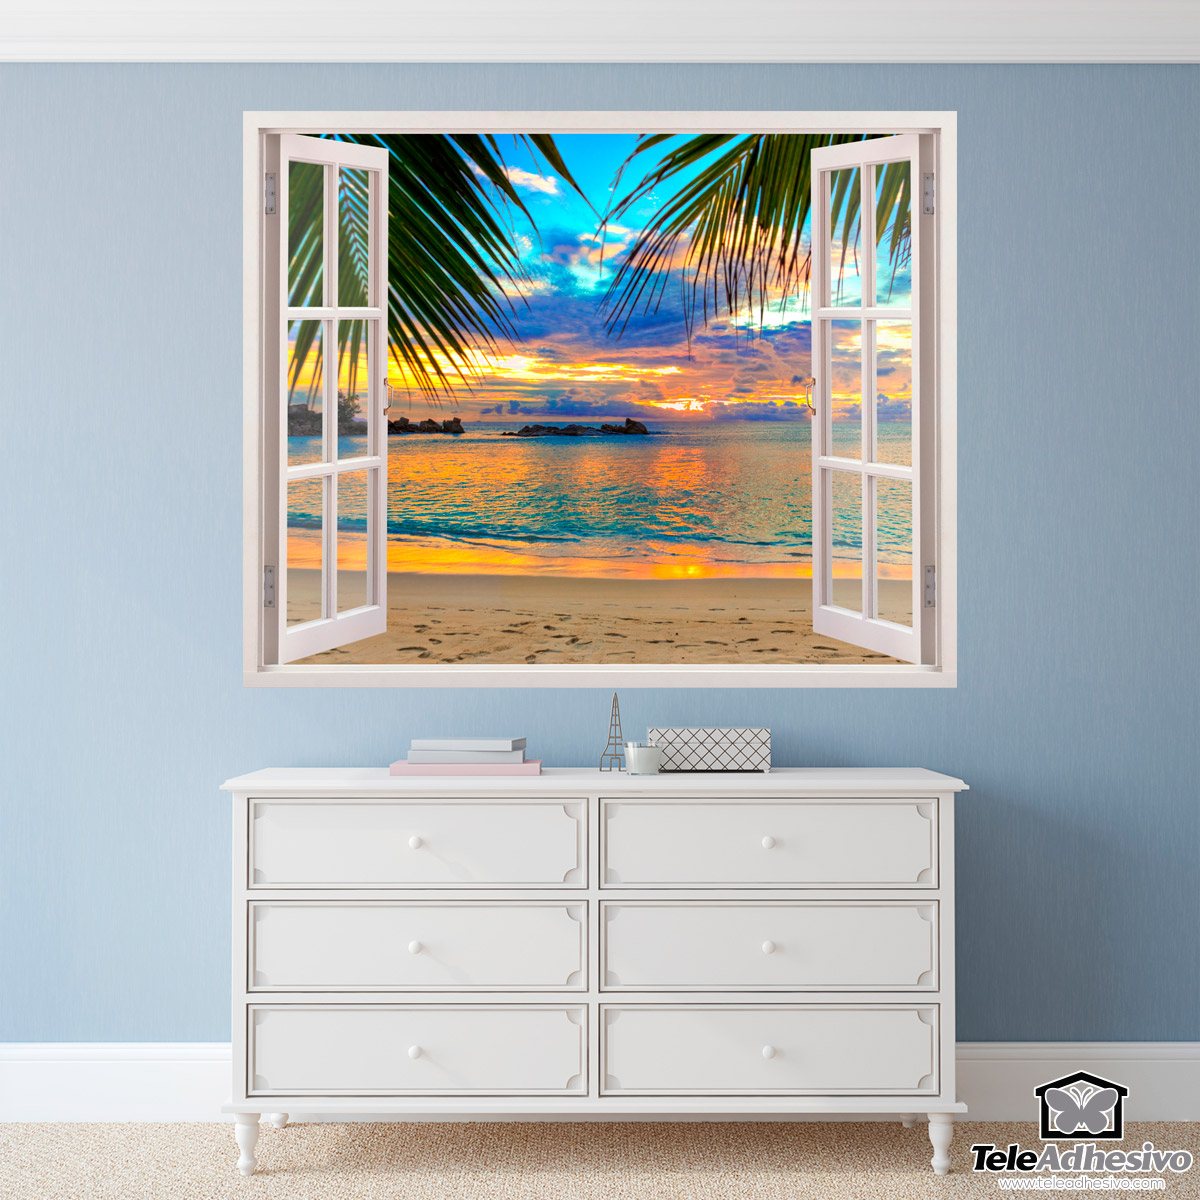 Wall Stickers: Sunset on the beach